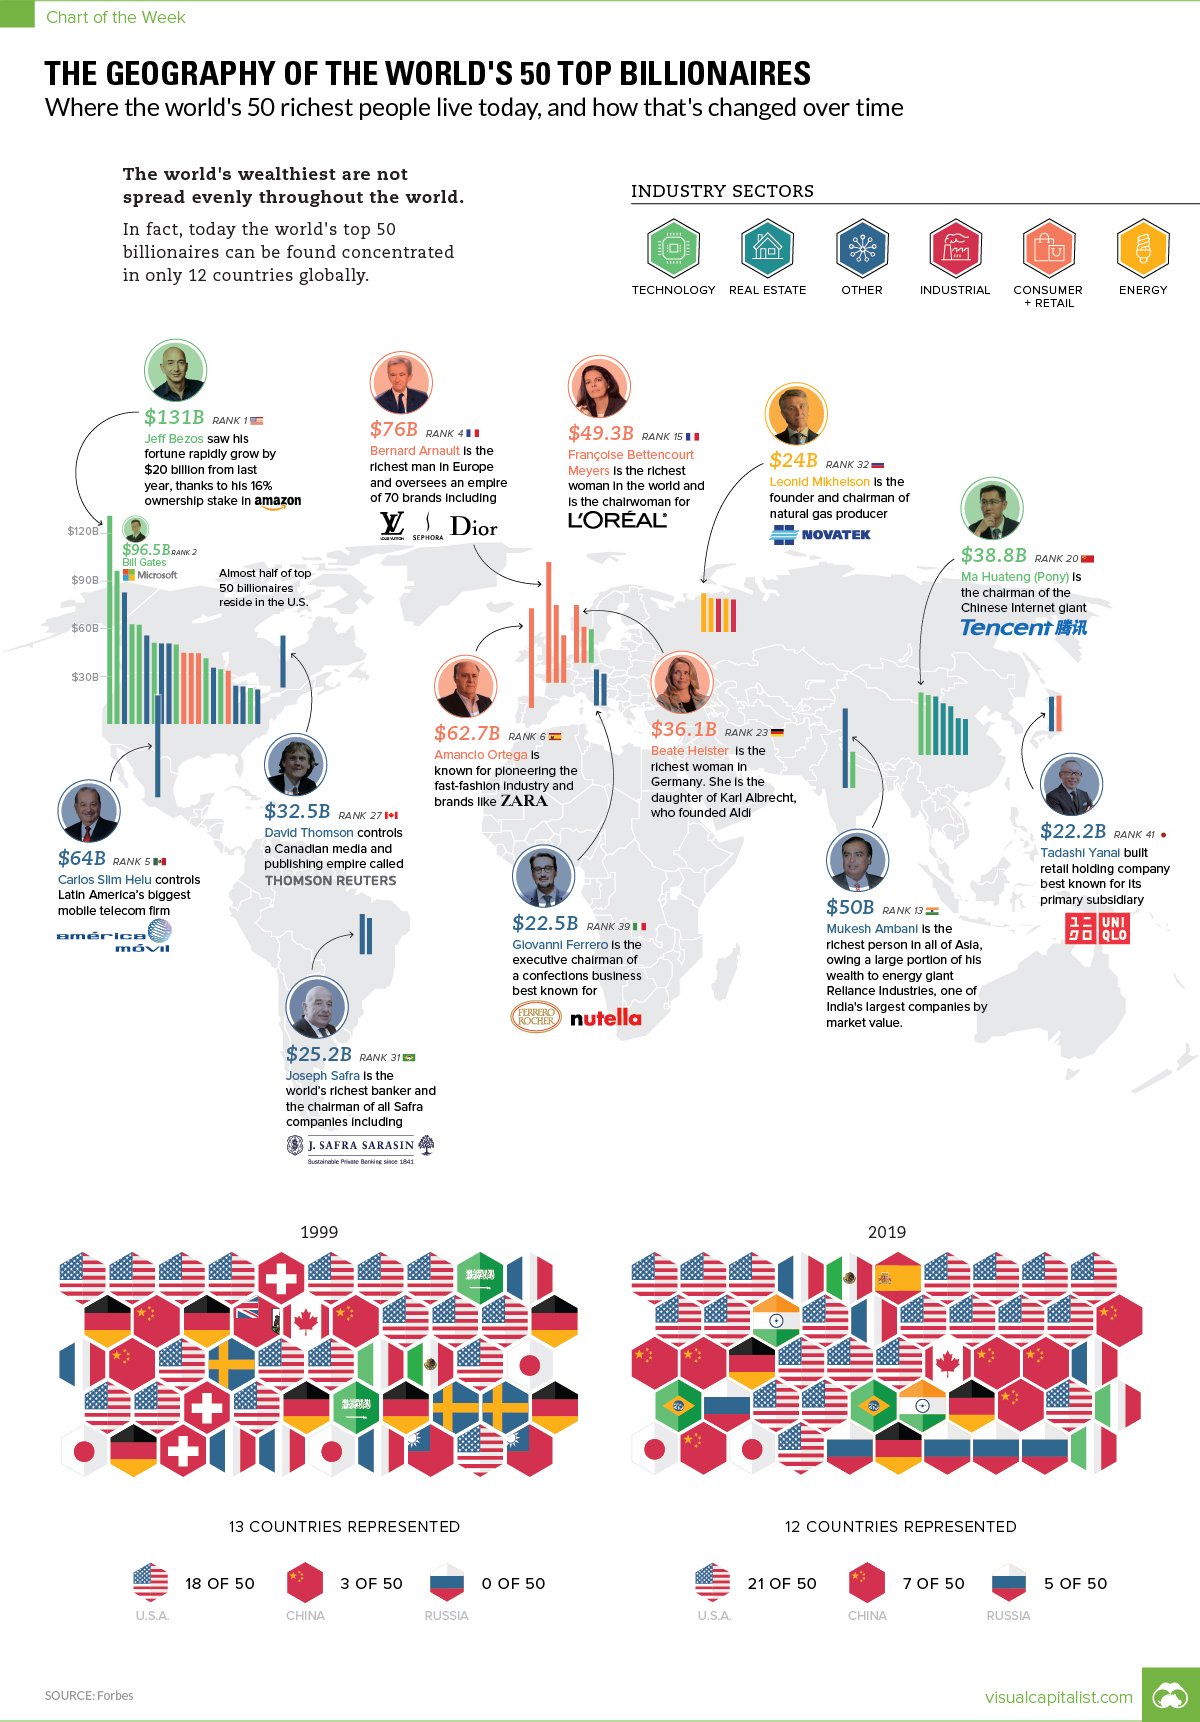 50 Top Billionaires by Geography